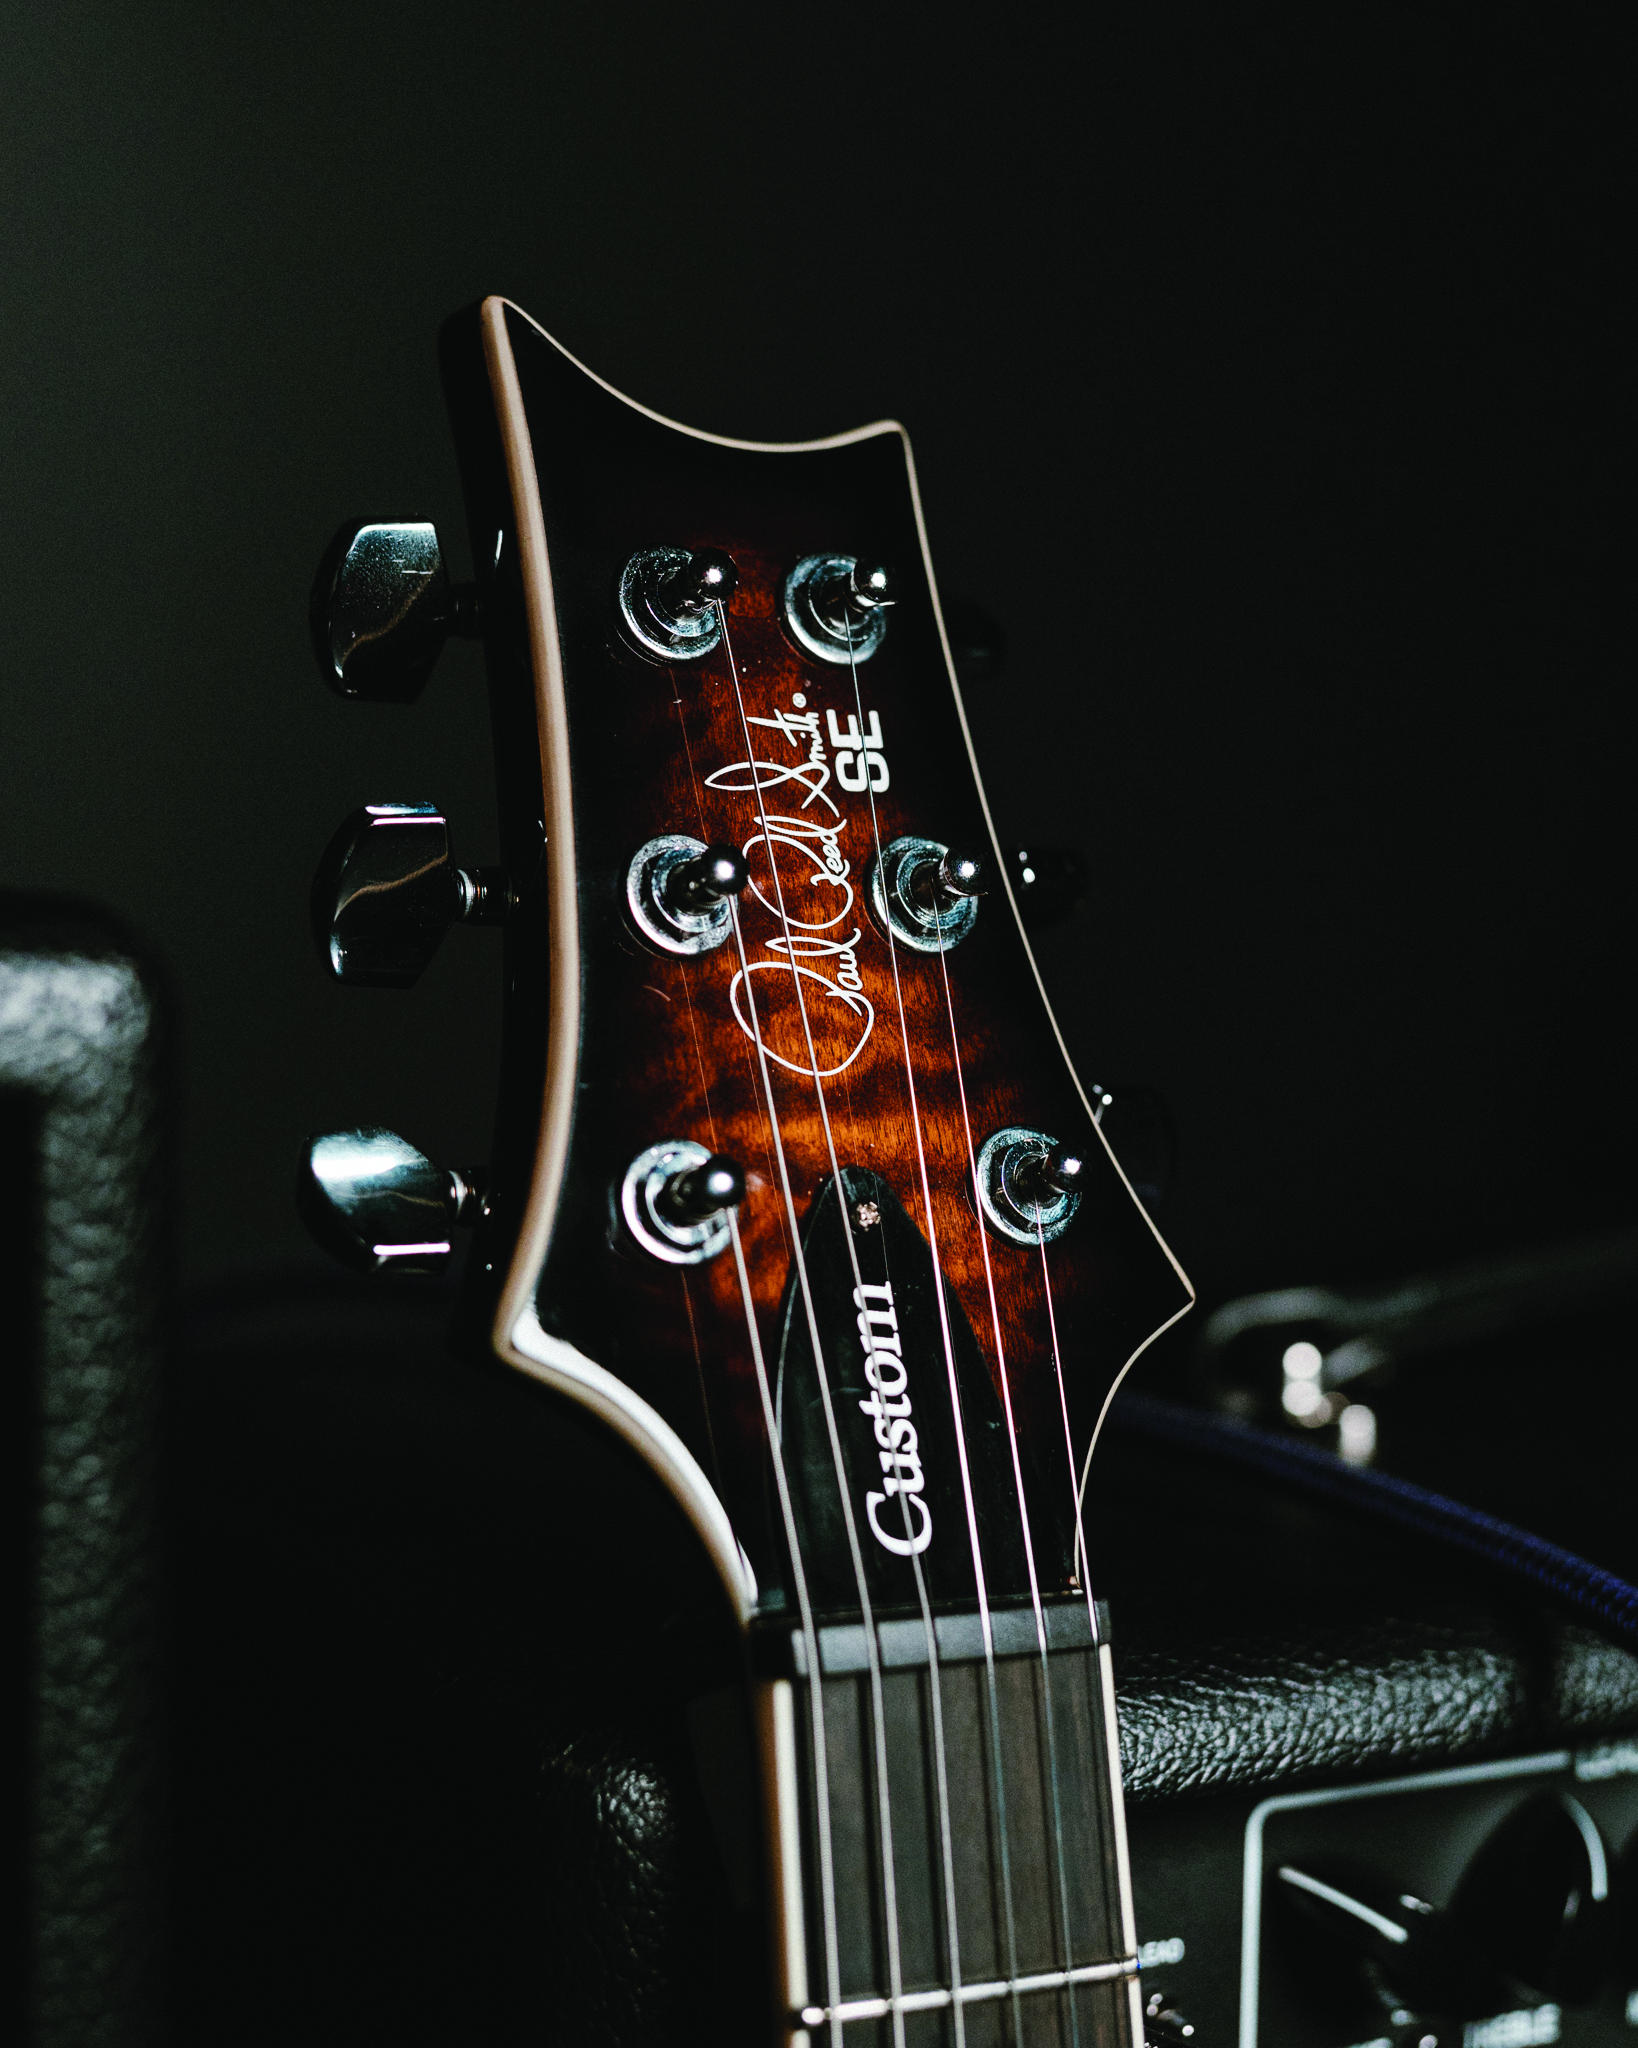 The headstock of the PRS SE Custom 24 Quilt